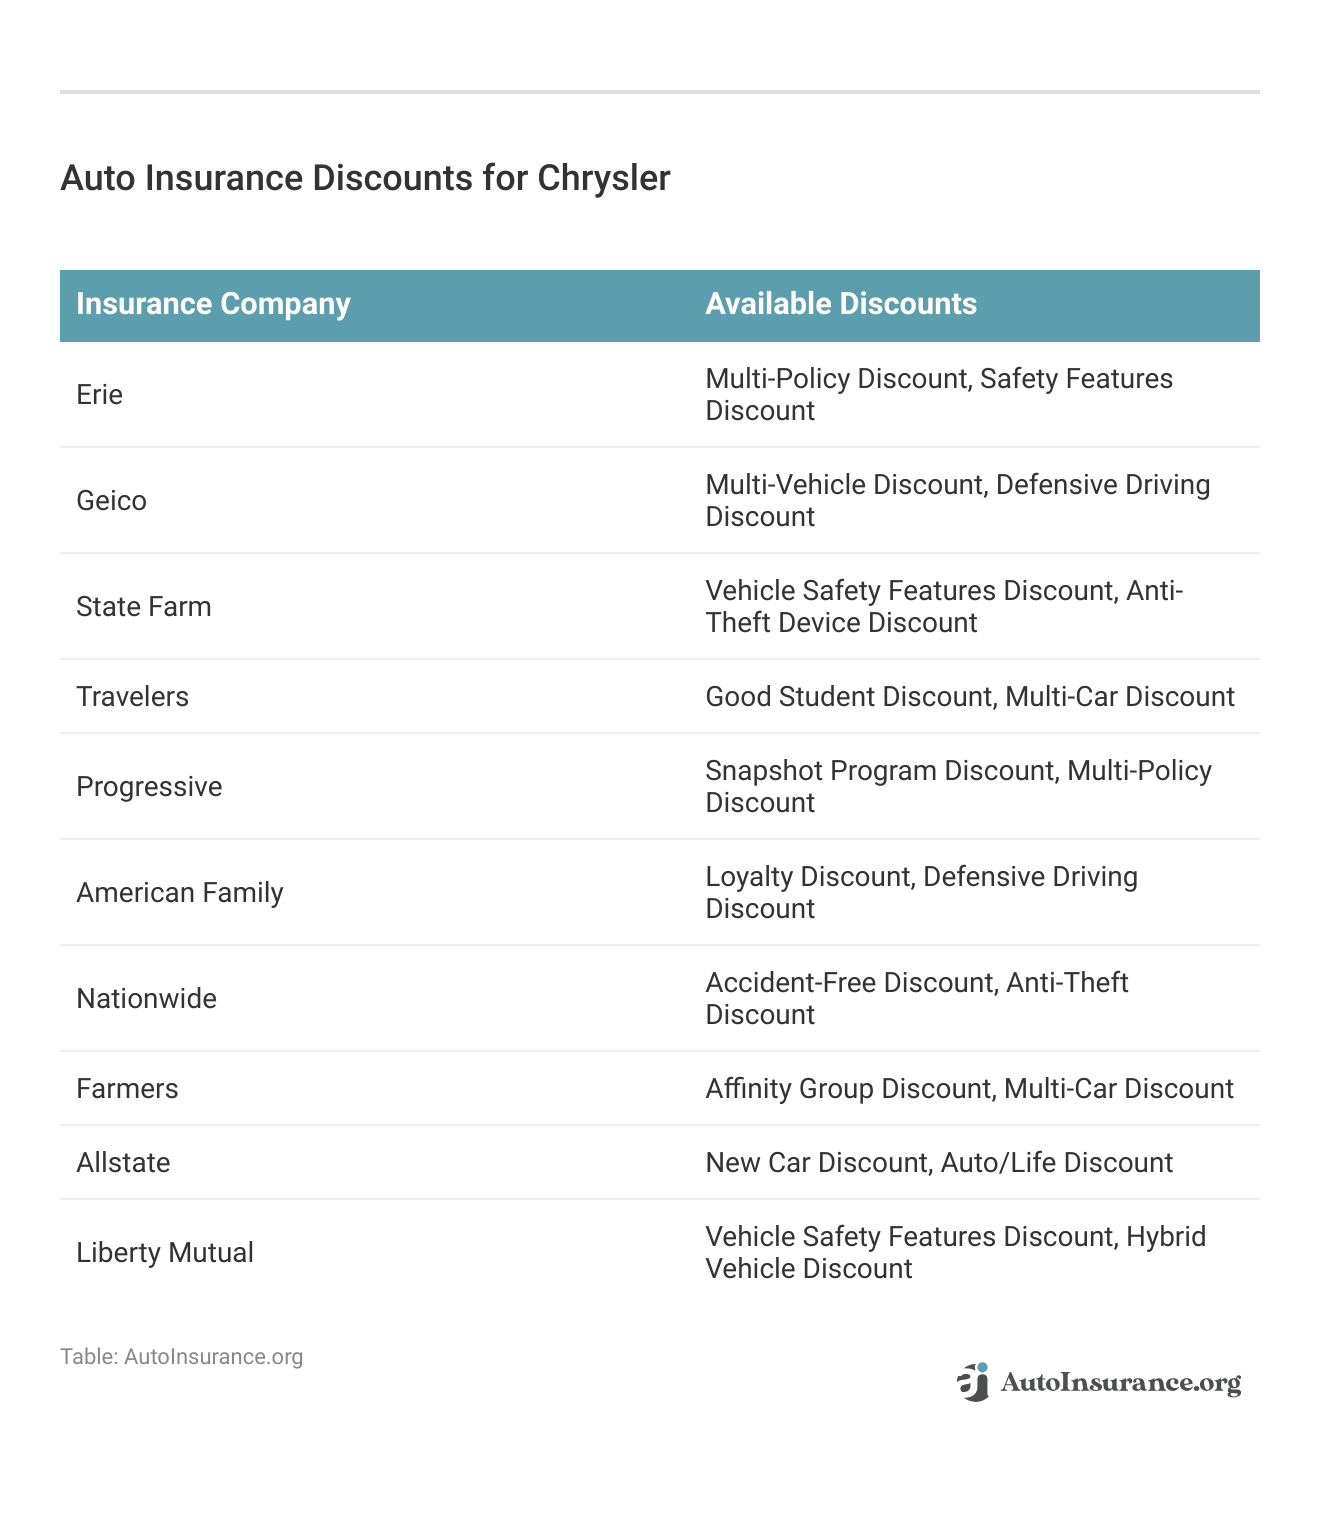 <h3>Auto Insurance Discounts for Chrysler</h3> 